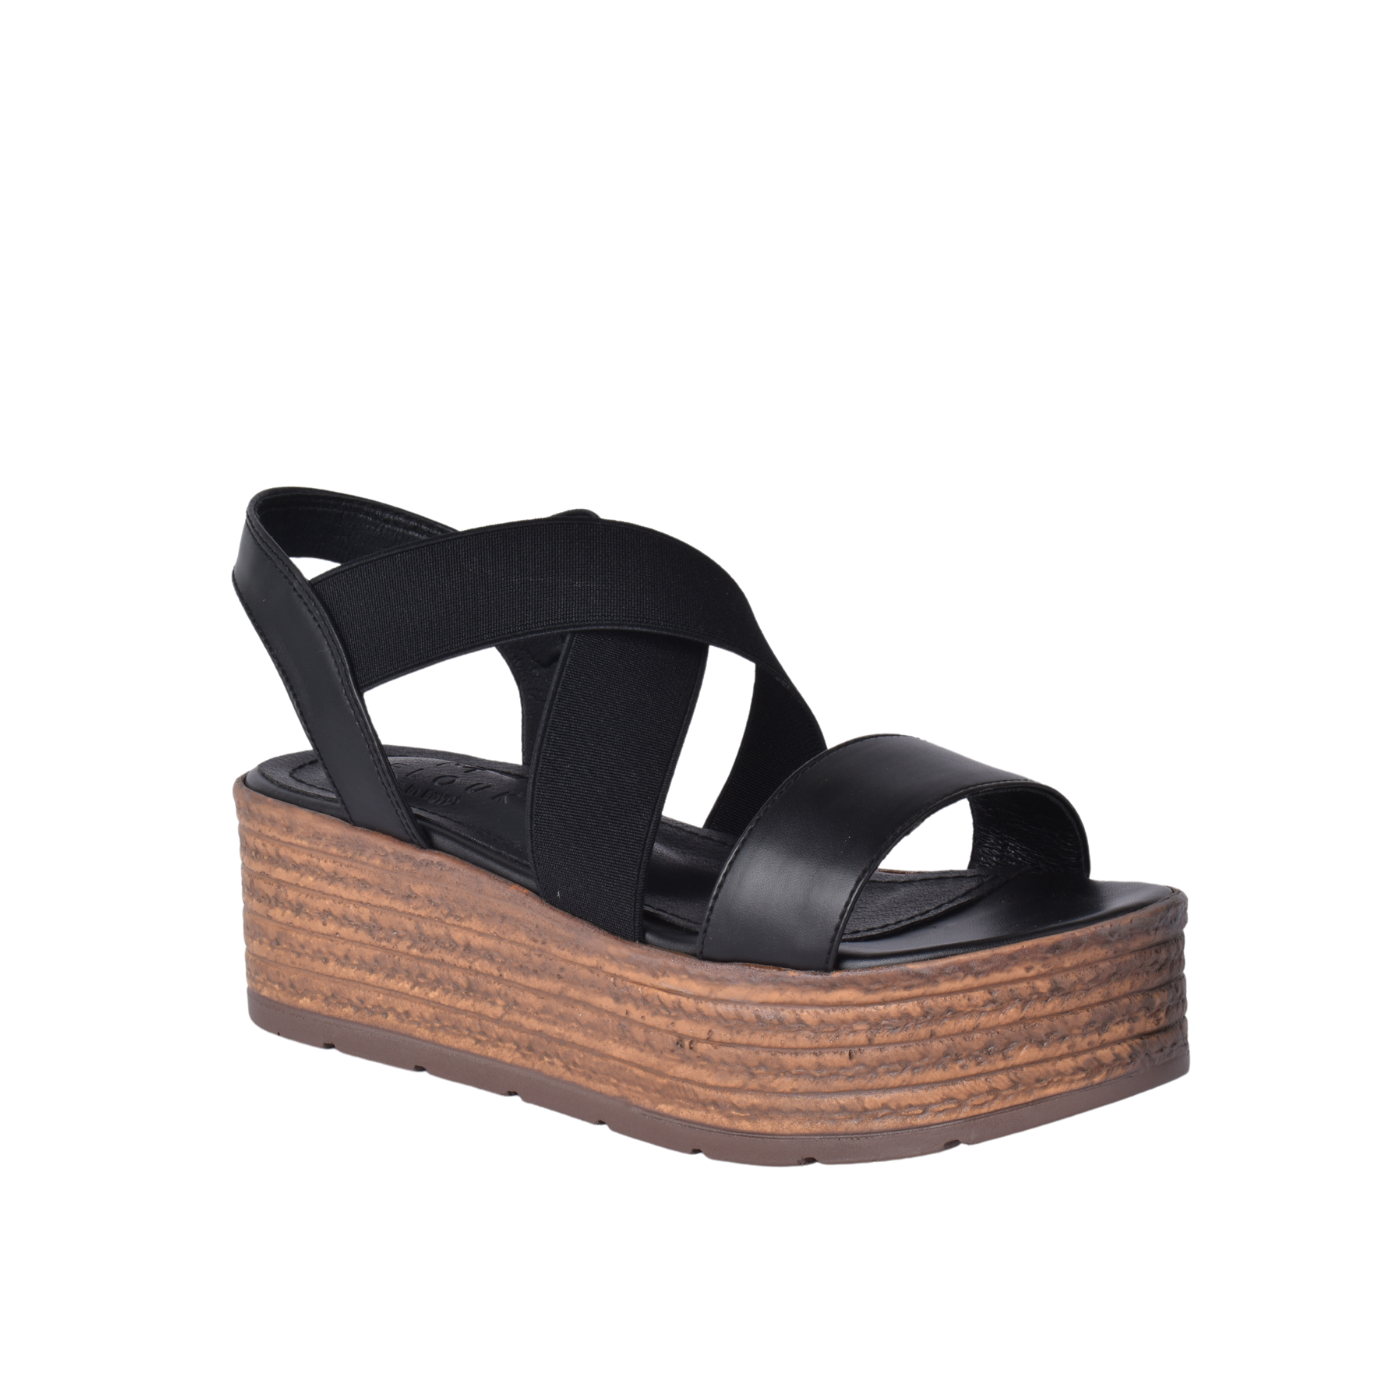 Sandals with Cross Strap